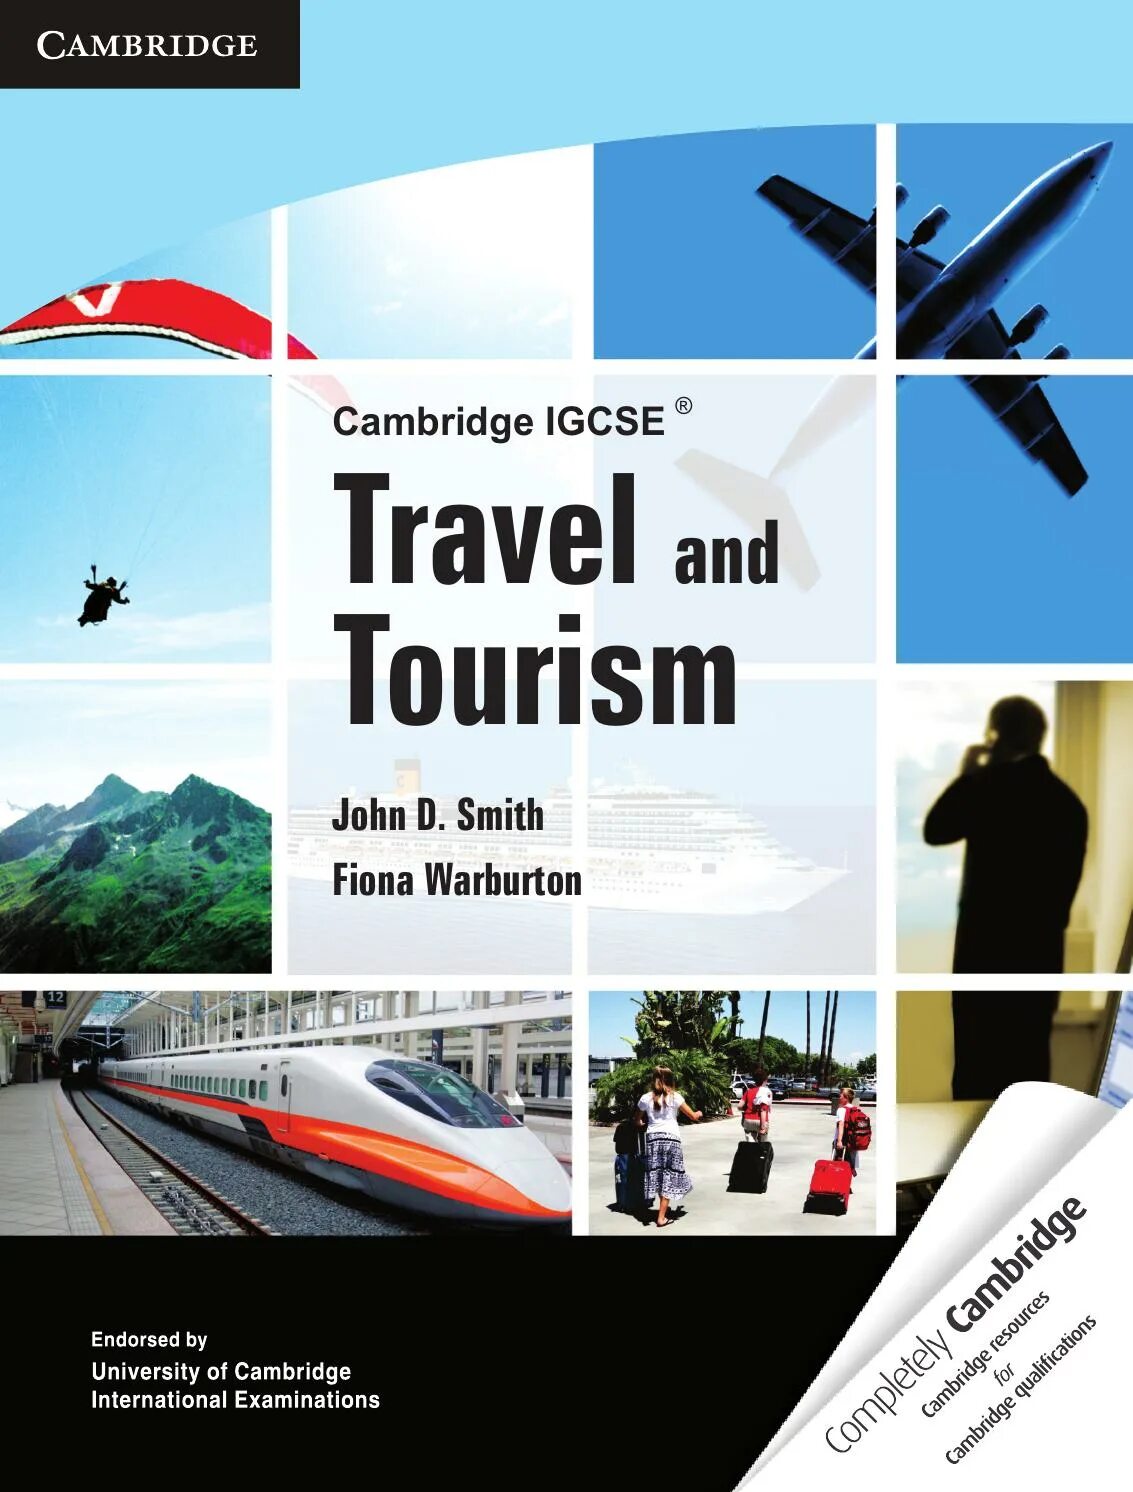 Tourism book. English books for Tourism. Booklet for Tourists. Travel and Tourism учебник для вузов. World Tourism учебник.